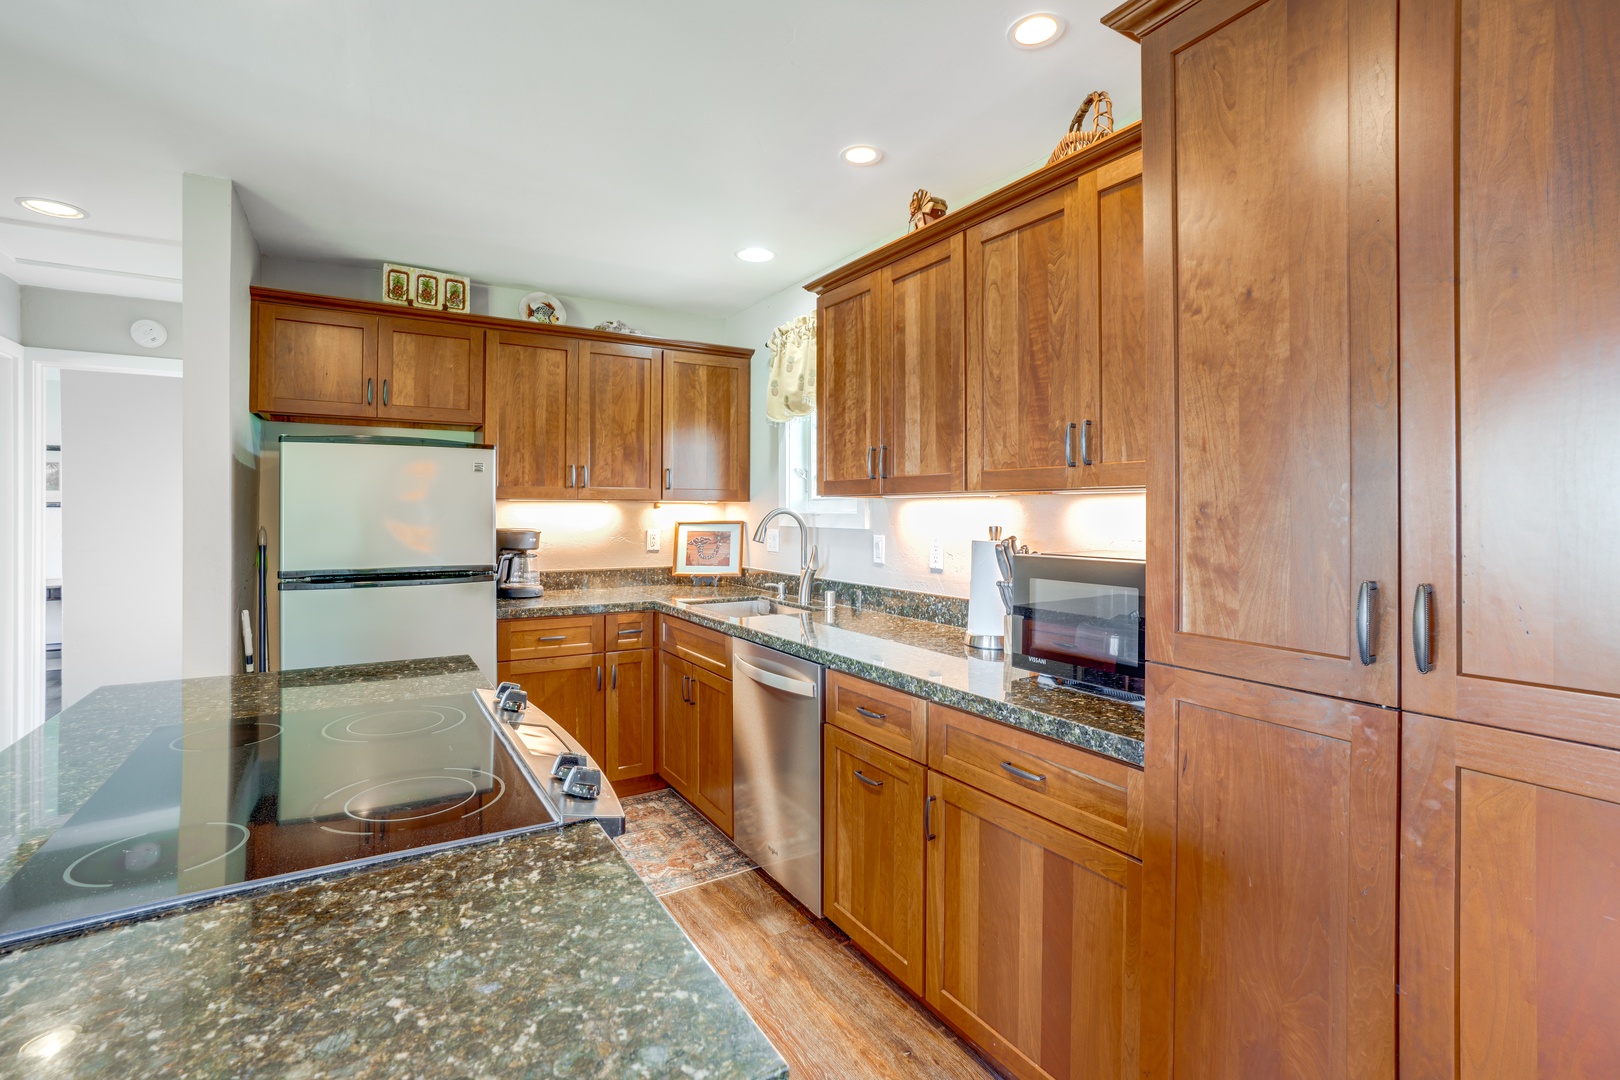 Princeville Vacation Rentals, Alii Kai 7201 - Featuring rich wooden cabinetry, sleek appliances, and a convenient island, it is perfectly equipped for crafting meals with the fresh flavors of the islands.